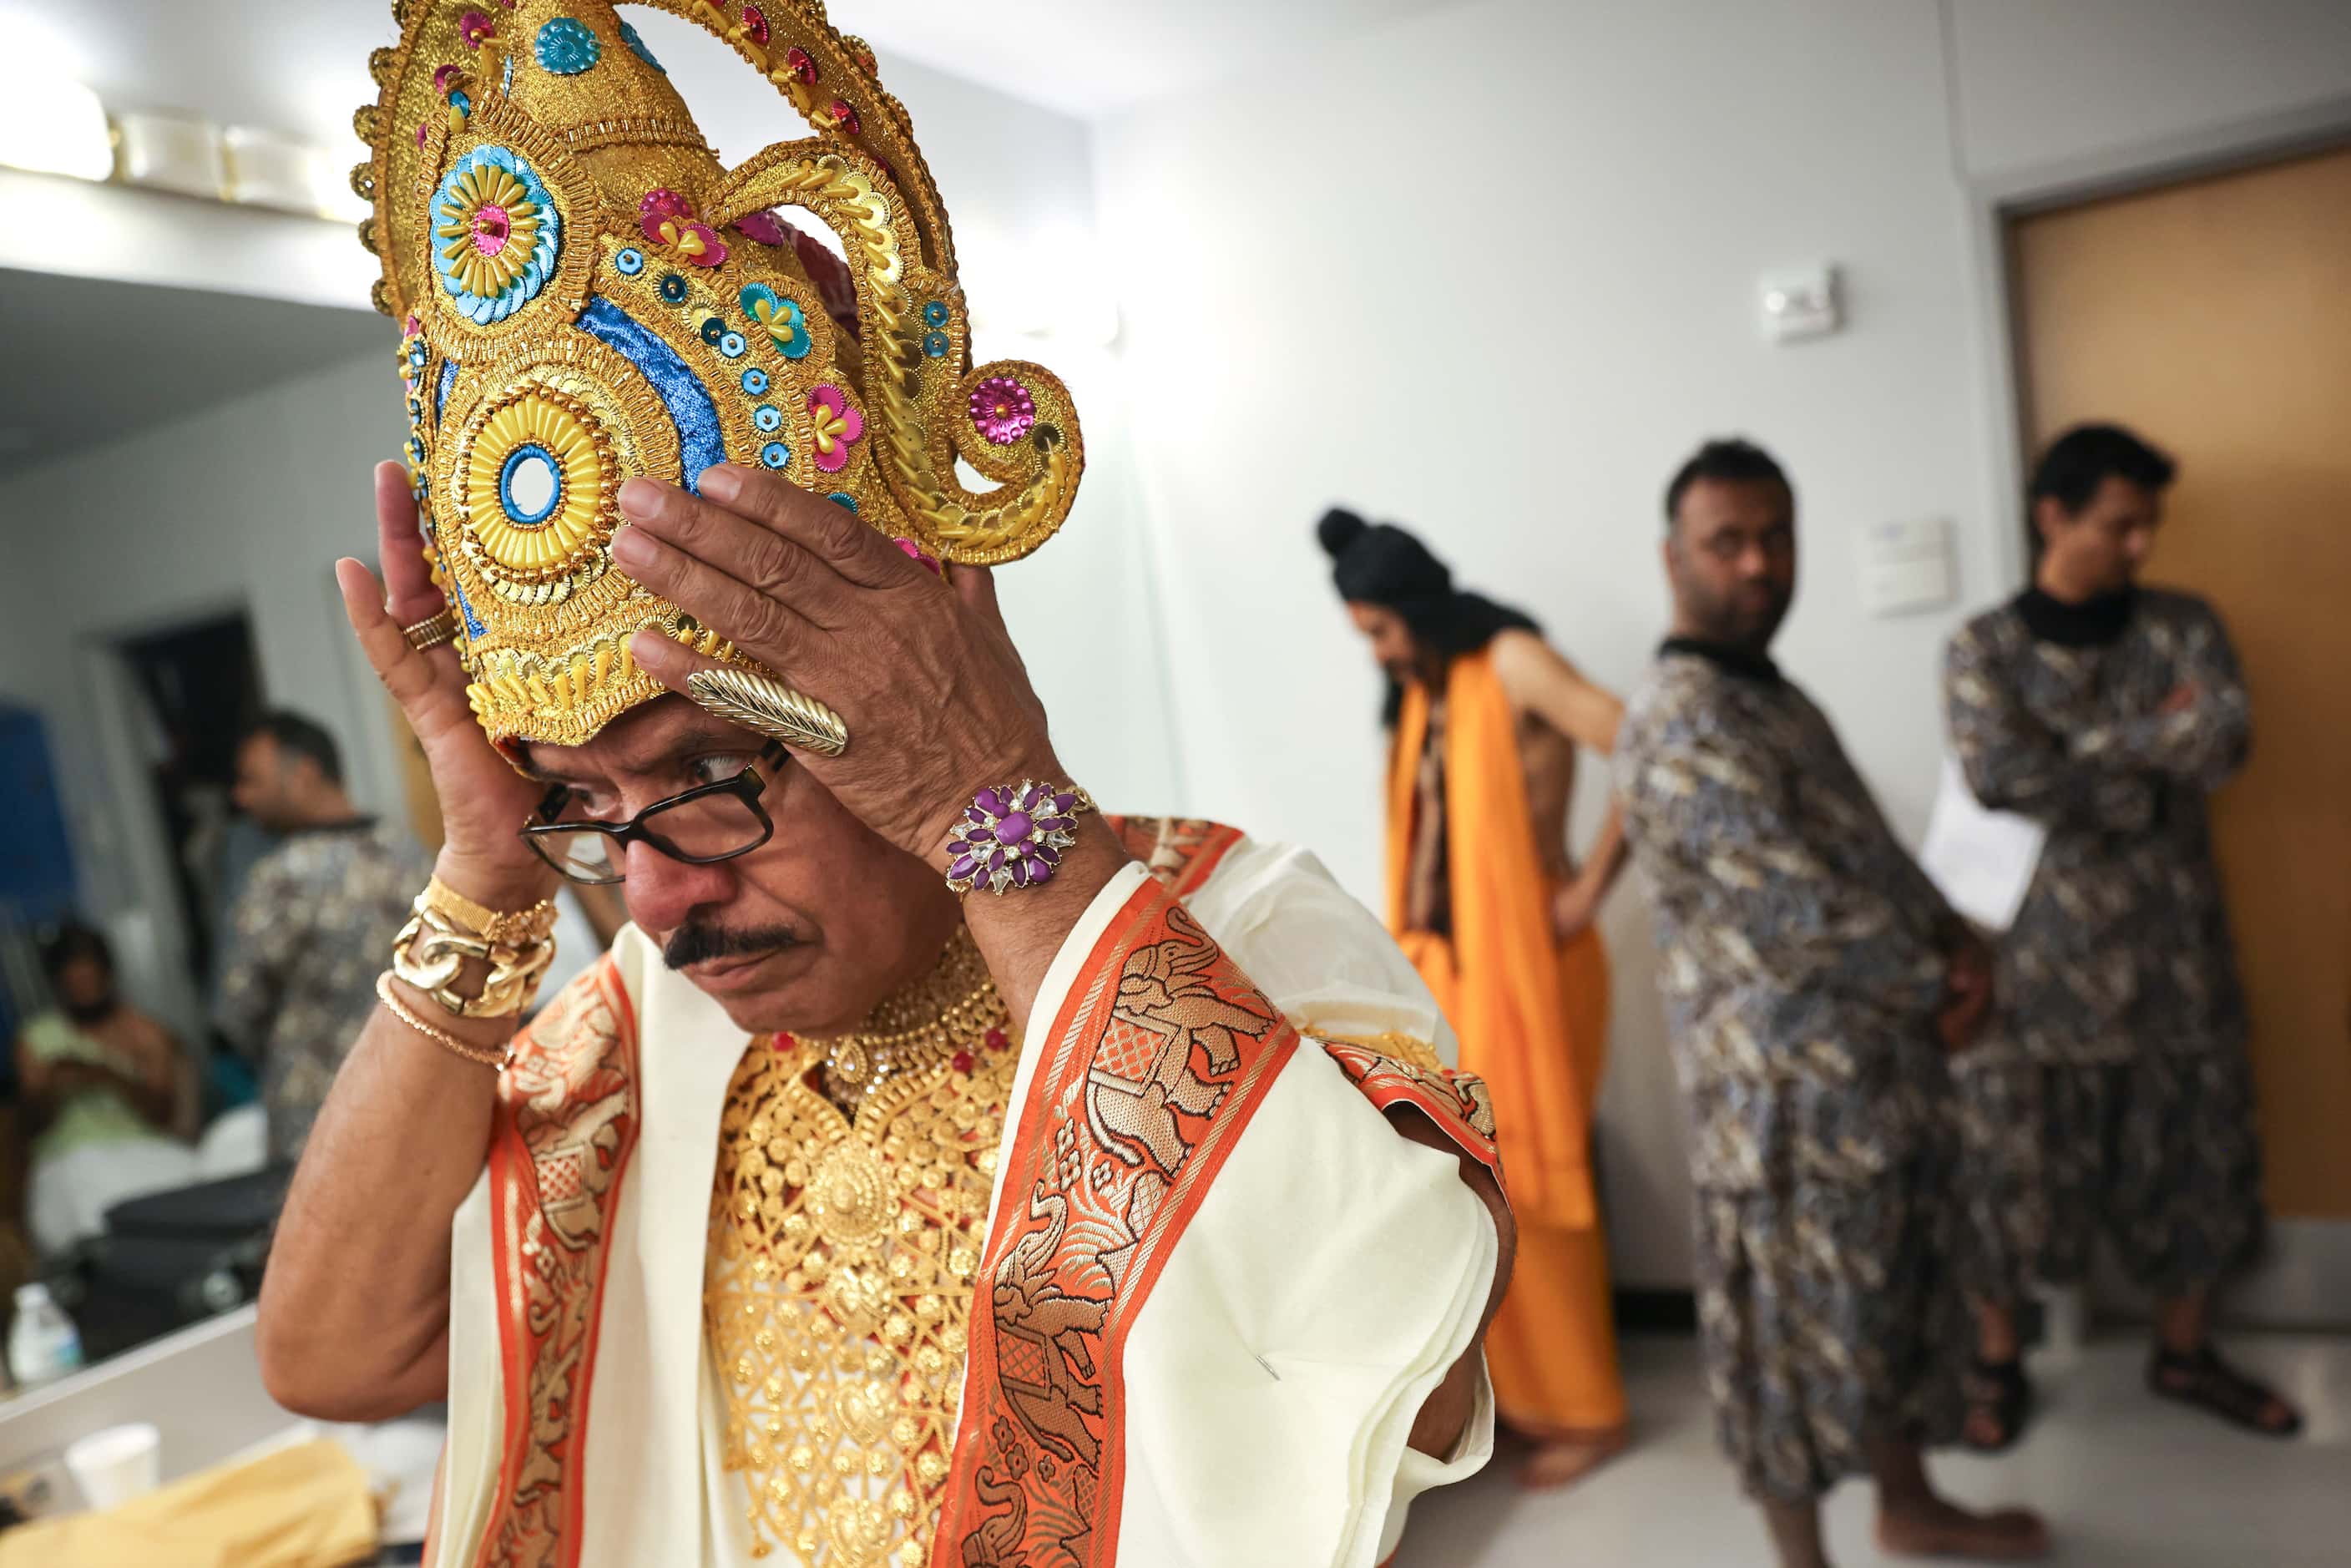 Cast members Md Mohiuddin, playing the role of Indra, puts on his Mukut (crown), as he...